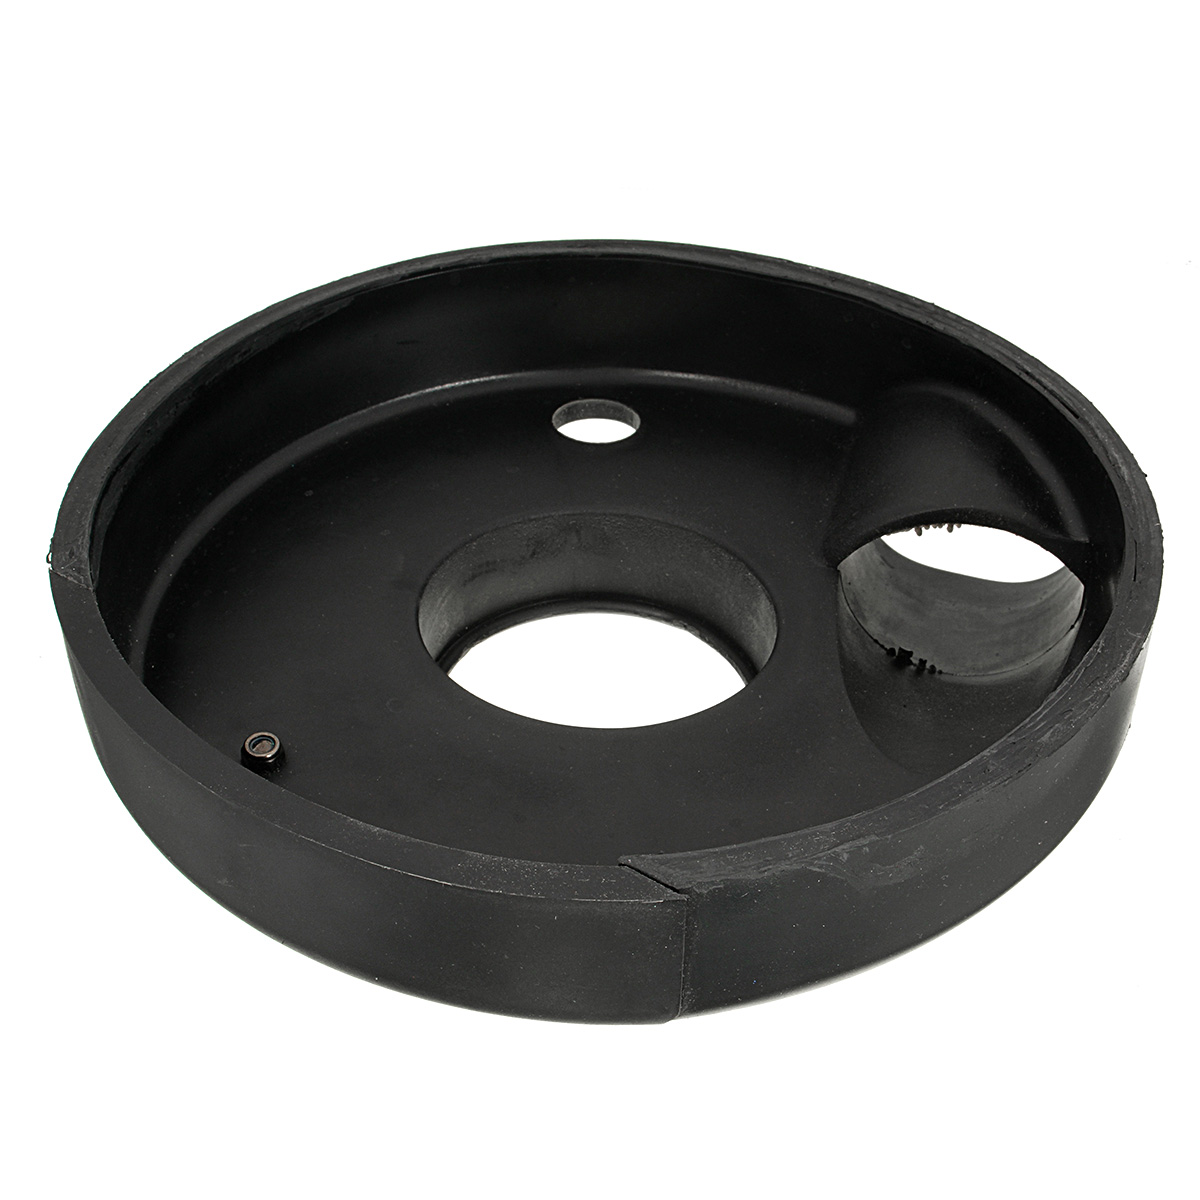 18cm-Black-Vacuum-Dust-Shroud-Cover-for-Angle-Grinder-Hand-Grind-Convertible-1191601-7